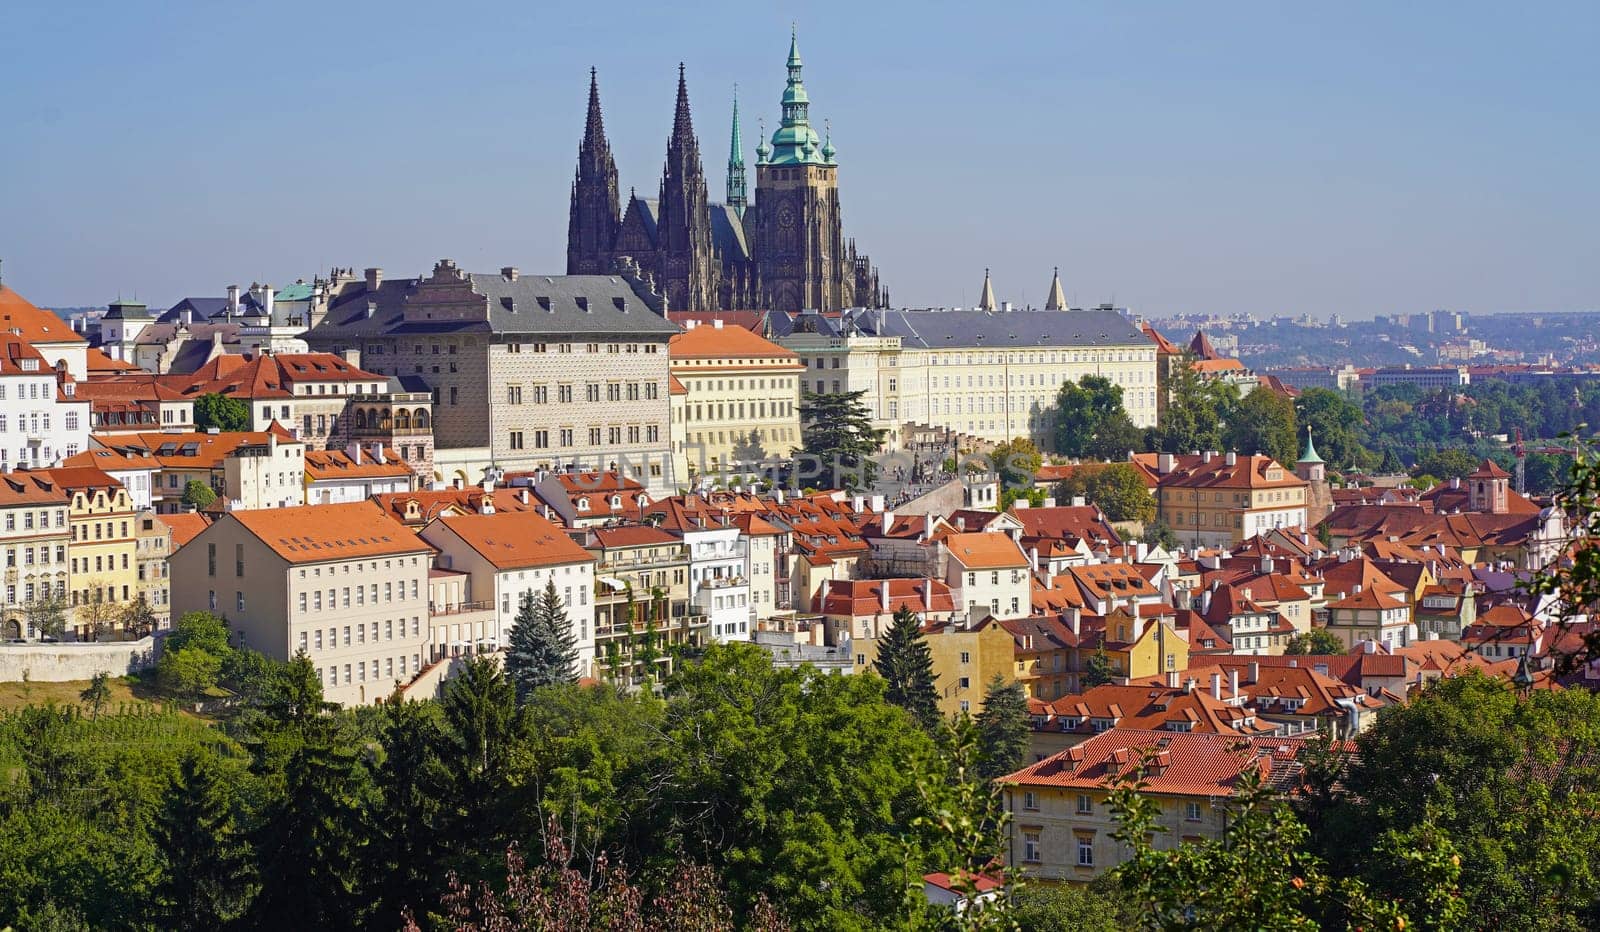 St. Vitus Cathedral.mView from Charles Bridge to Prague Castle. Concept - tourism, travel.